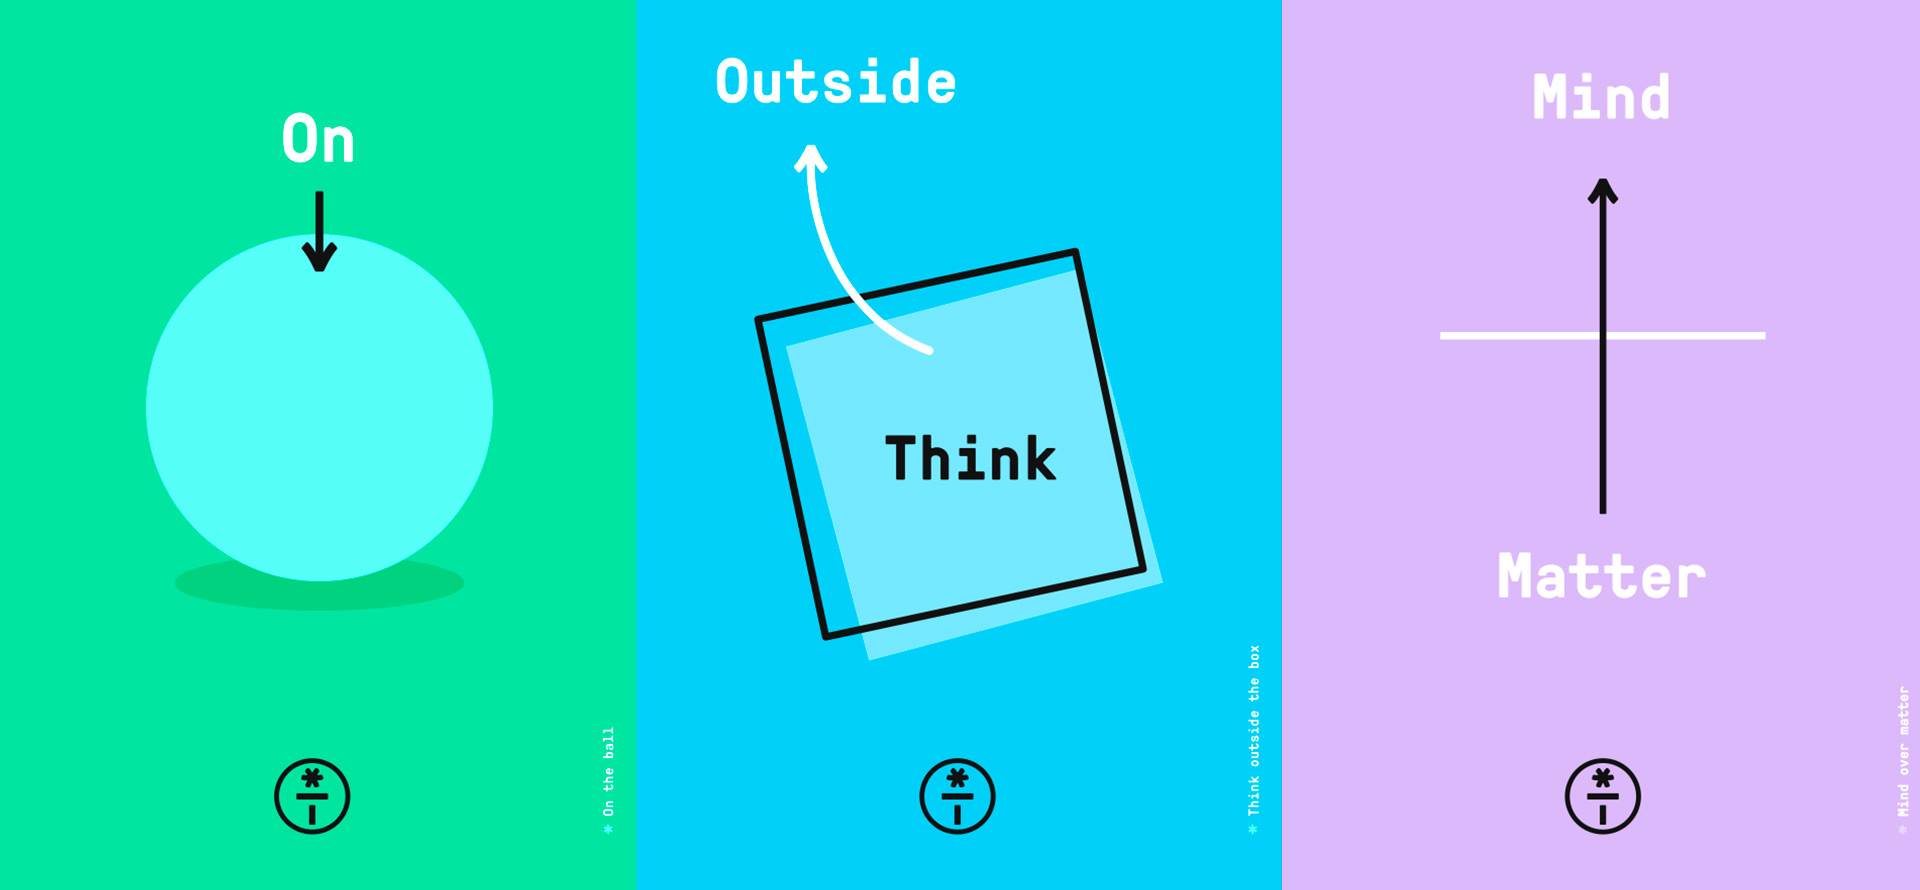 T.Lab illustrations, 'On the ball', 'Think outside the box' and 'Mind over matter'.